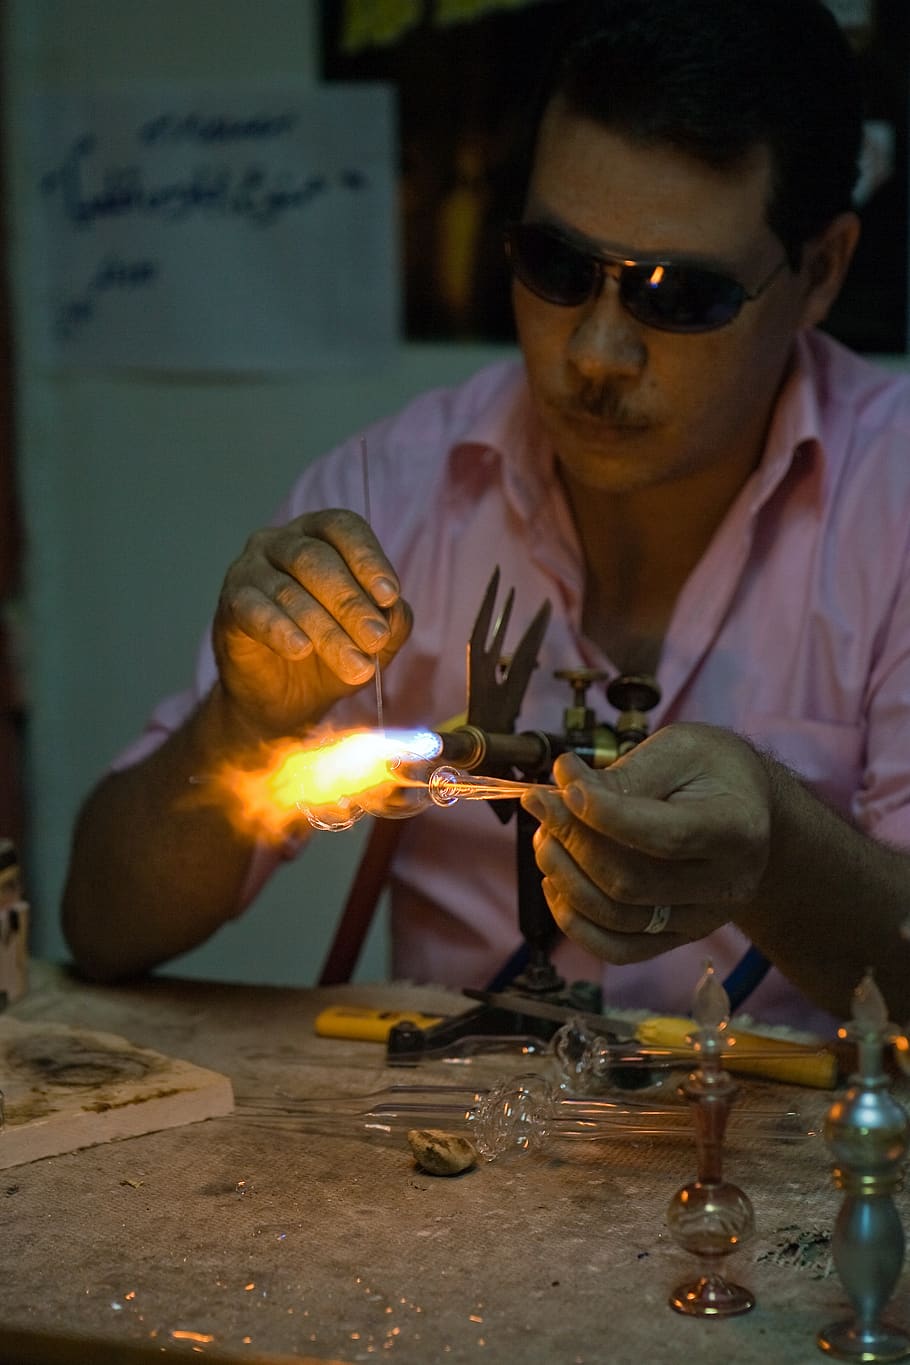 glass, fabrication, flame, burning, egyptian, man, craft, holding, one person, skill